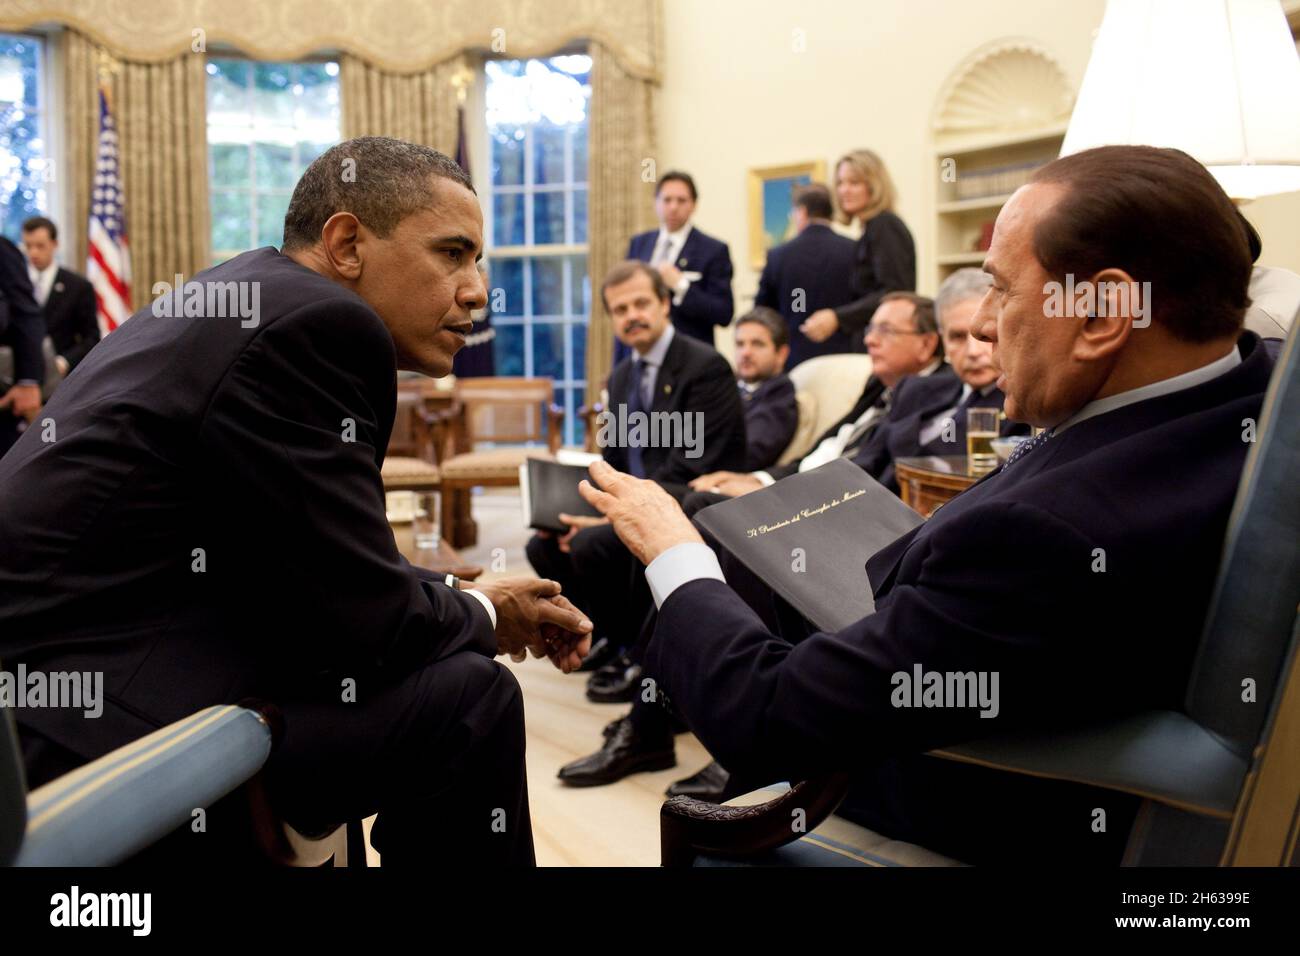 President Barack Obama meets with Italian Prime Minister Silvio Berlusconi in the Oval Office of the White House, June 15, 2009 Stock Photo